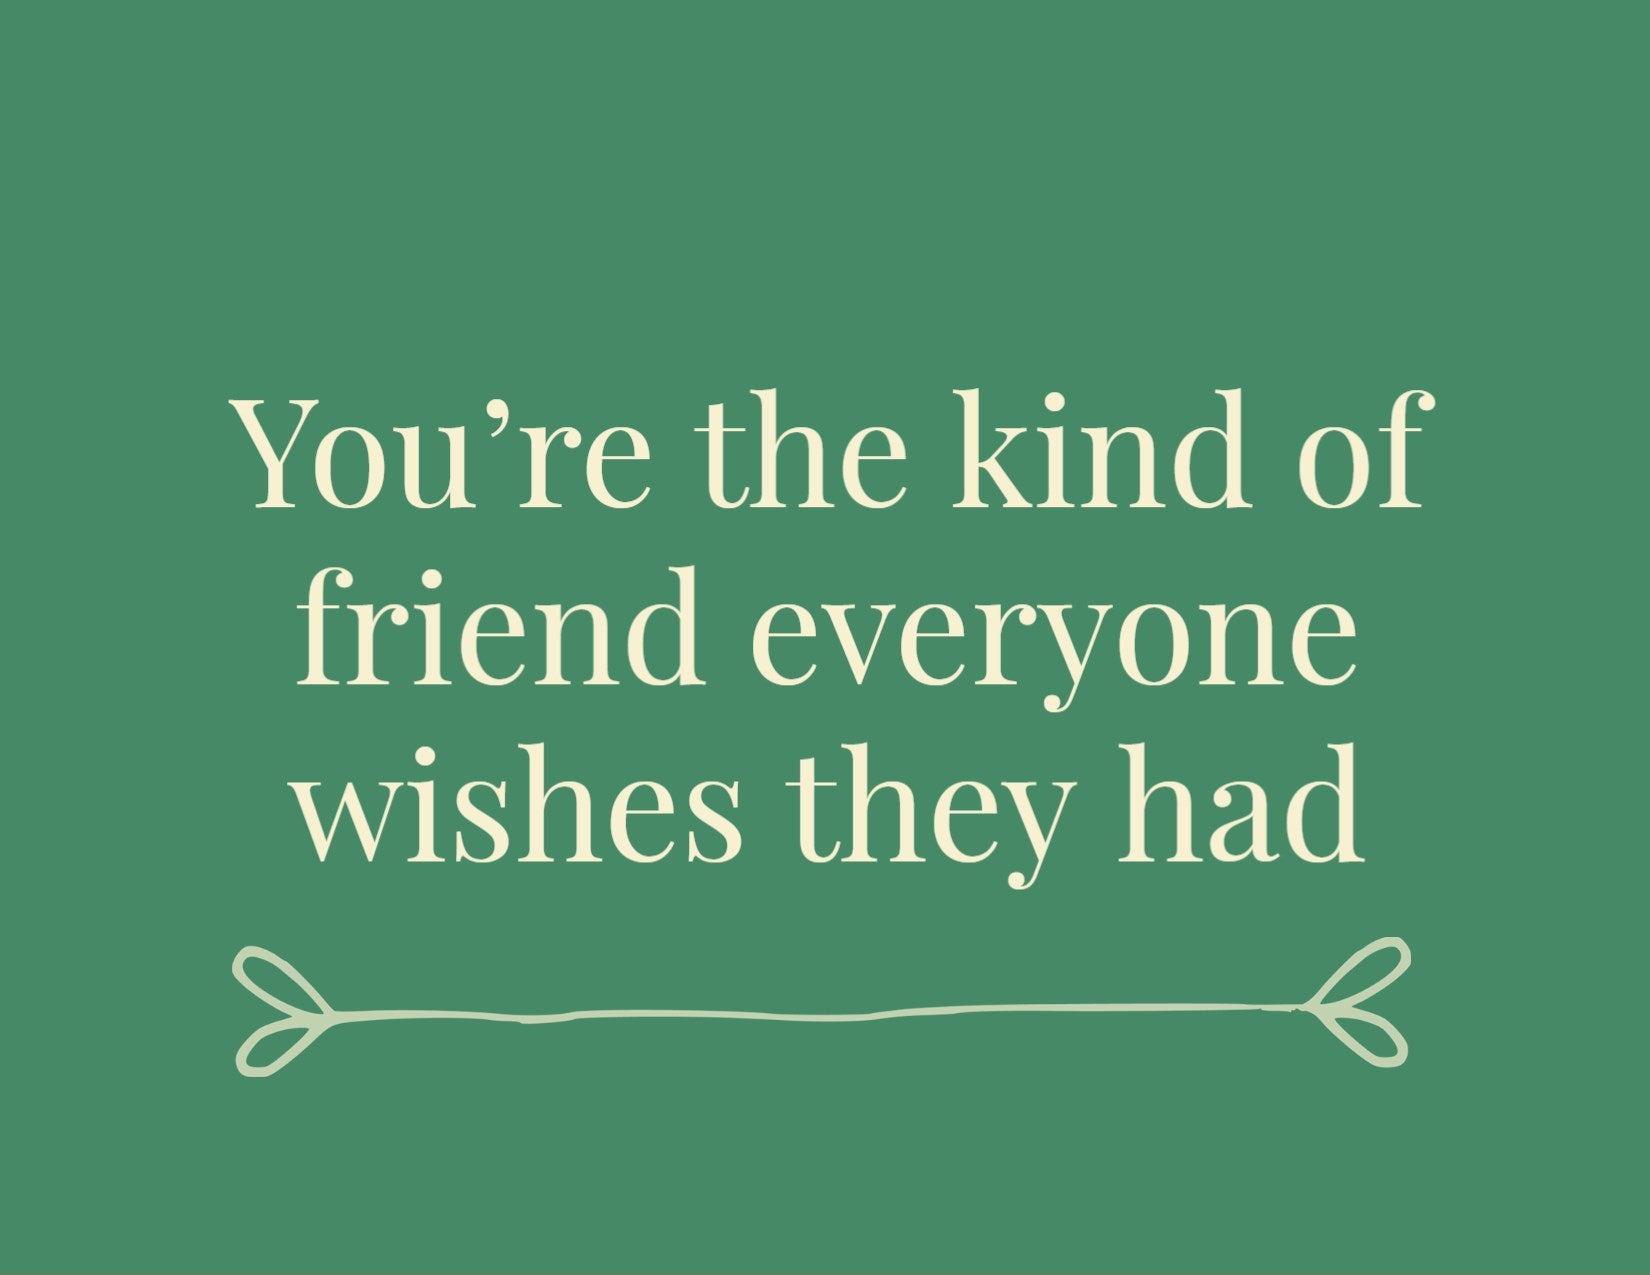 YOU'RE THE KIND OF FRIEND EVERYONE WISHES THEY HAD